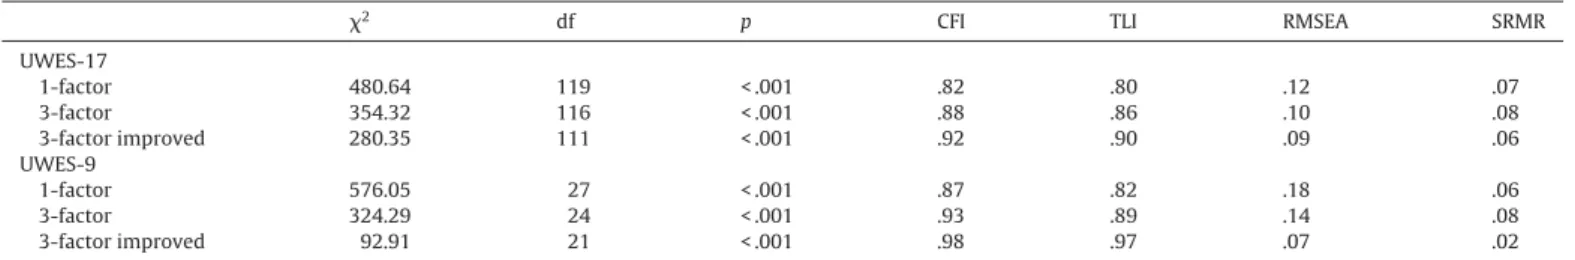 Table 2 reports the values for means and standard deviations, effect size of the differences between women and men,  correla-tions with age, internal consistencies, and skewness and kurtosis.